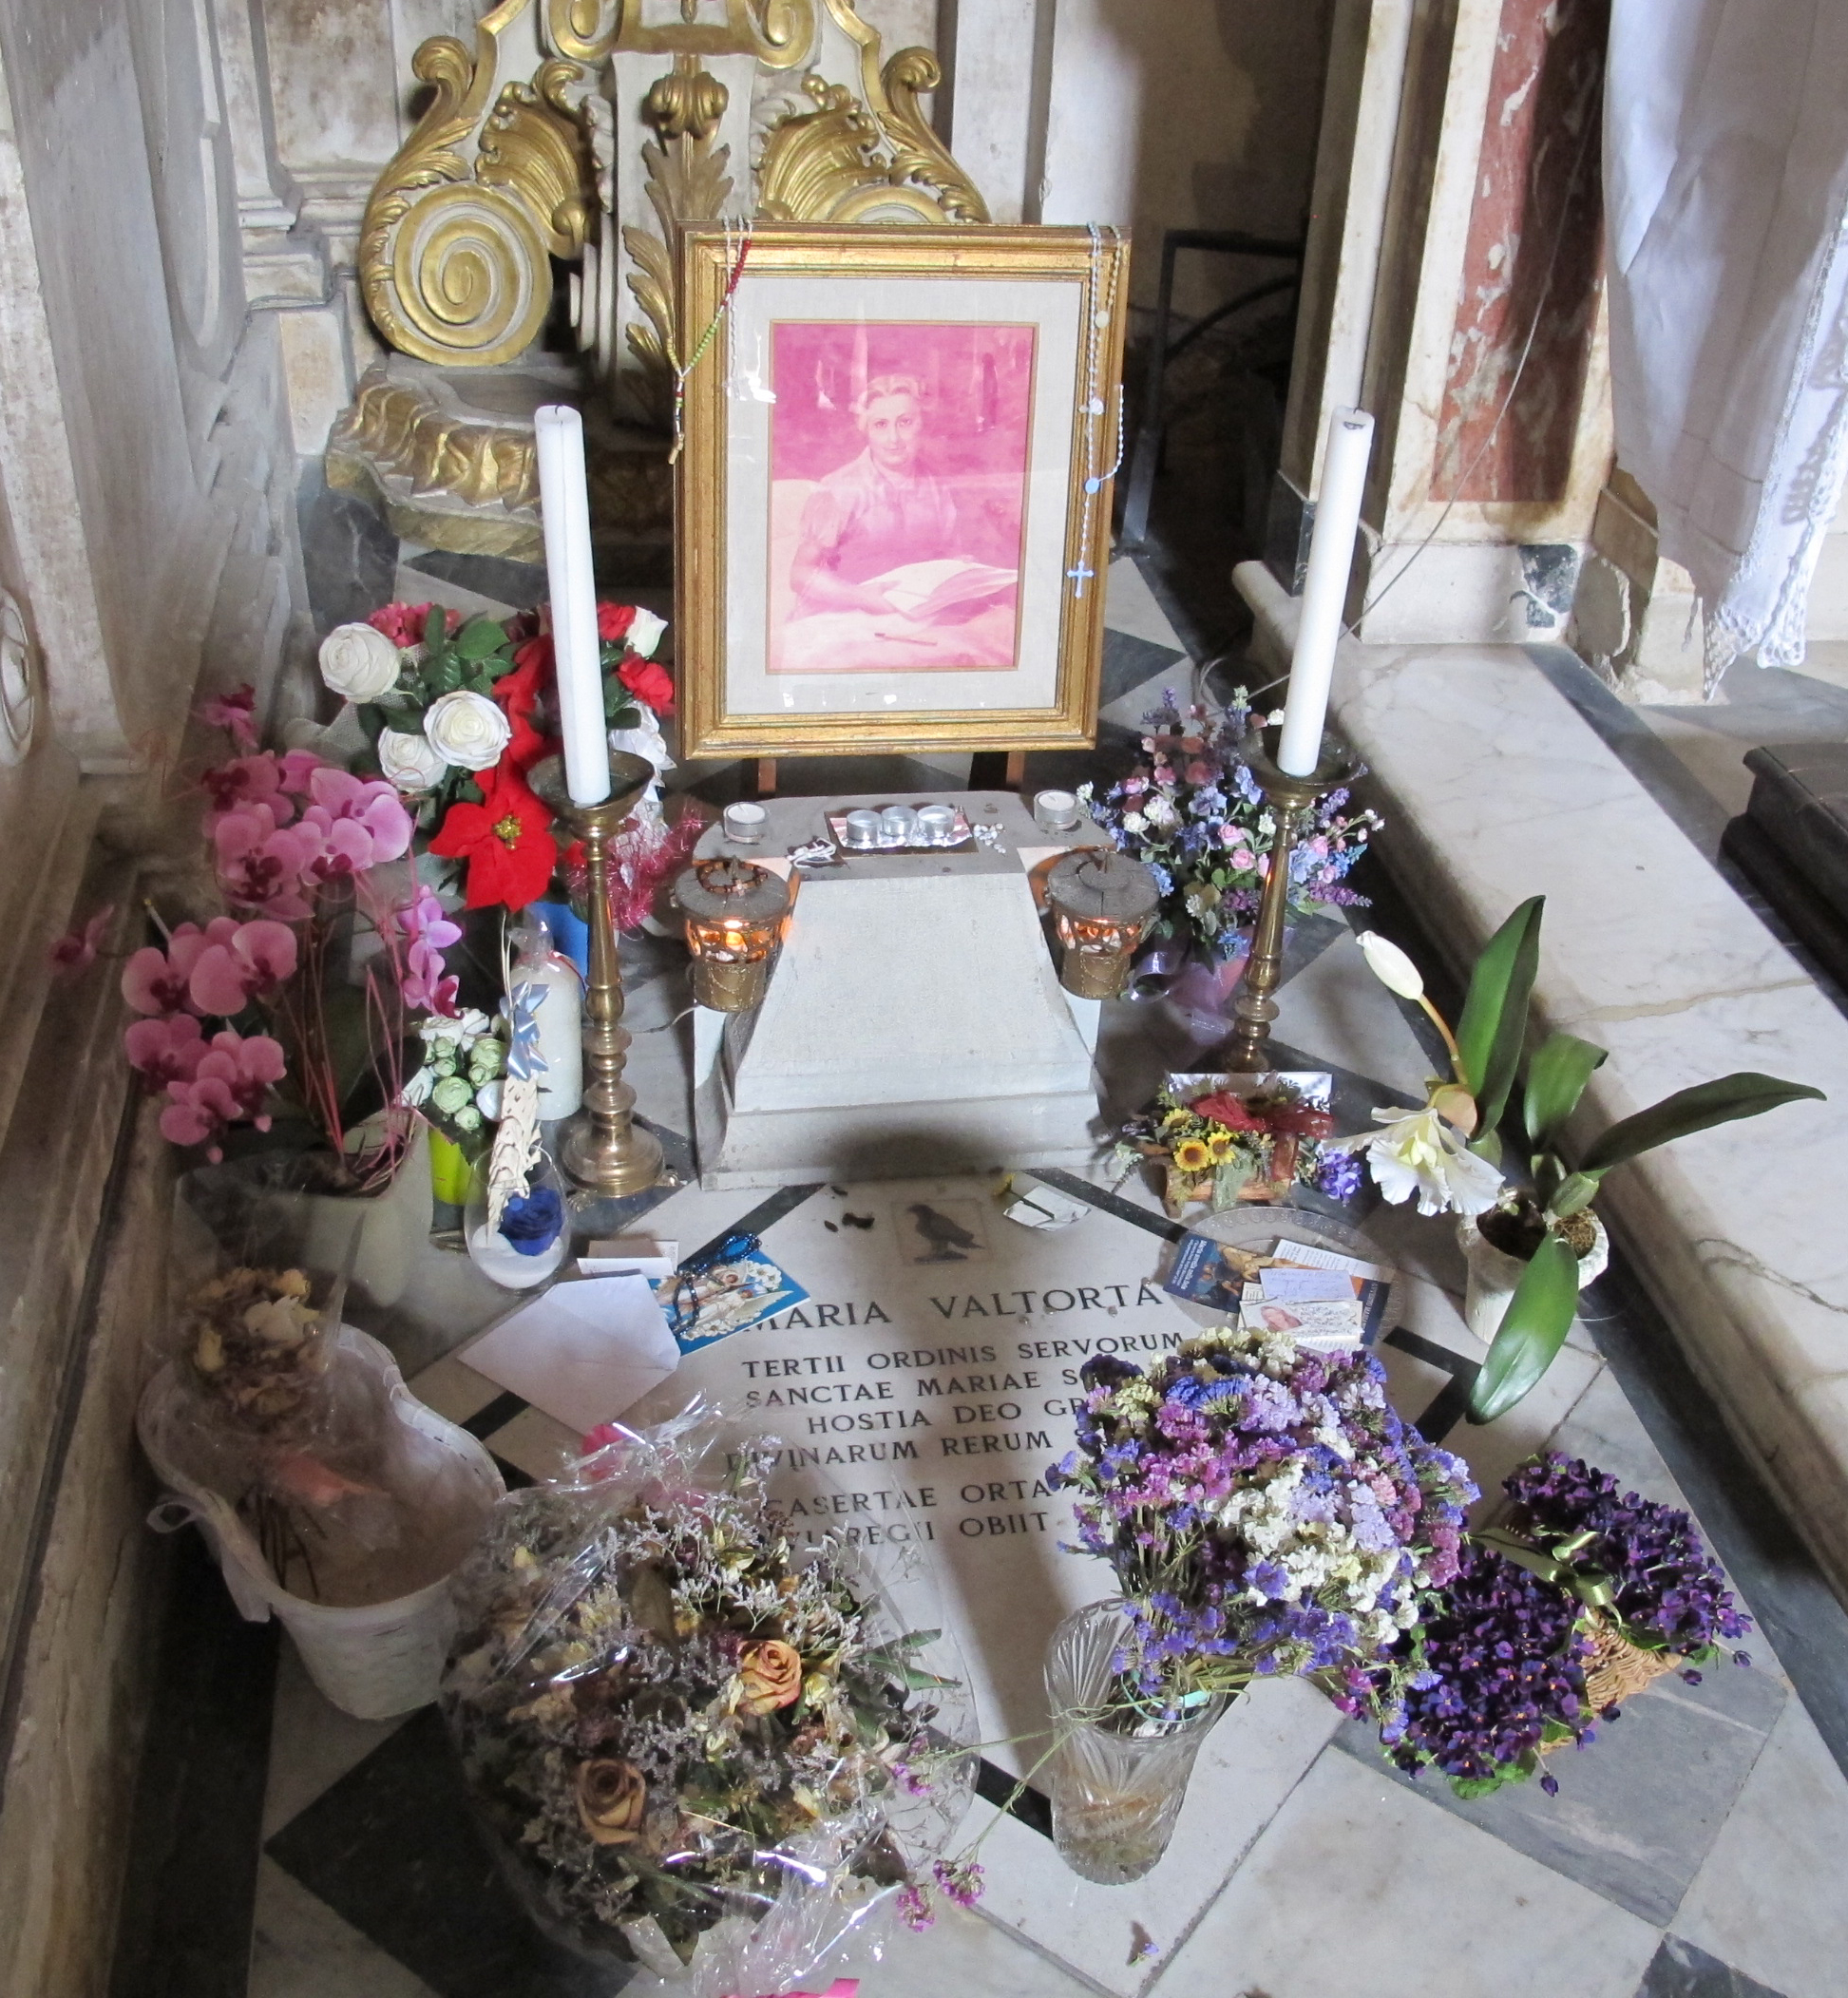 Grave of Maria Valtorta - Chapter of Ss. Annunziata - Florence